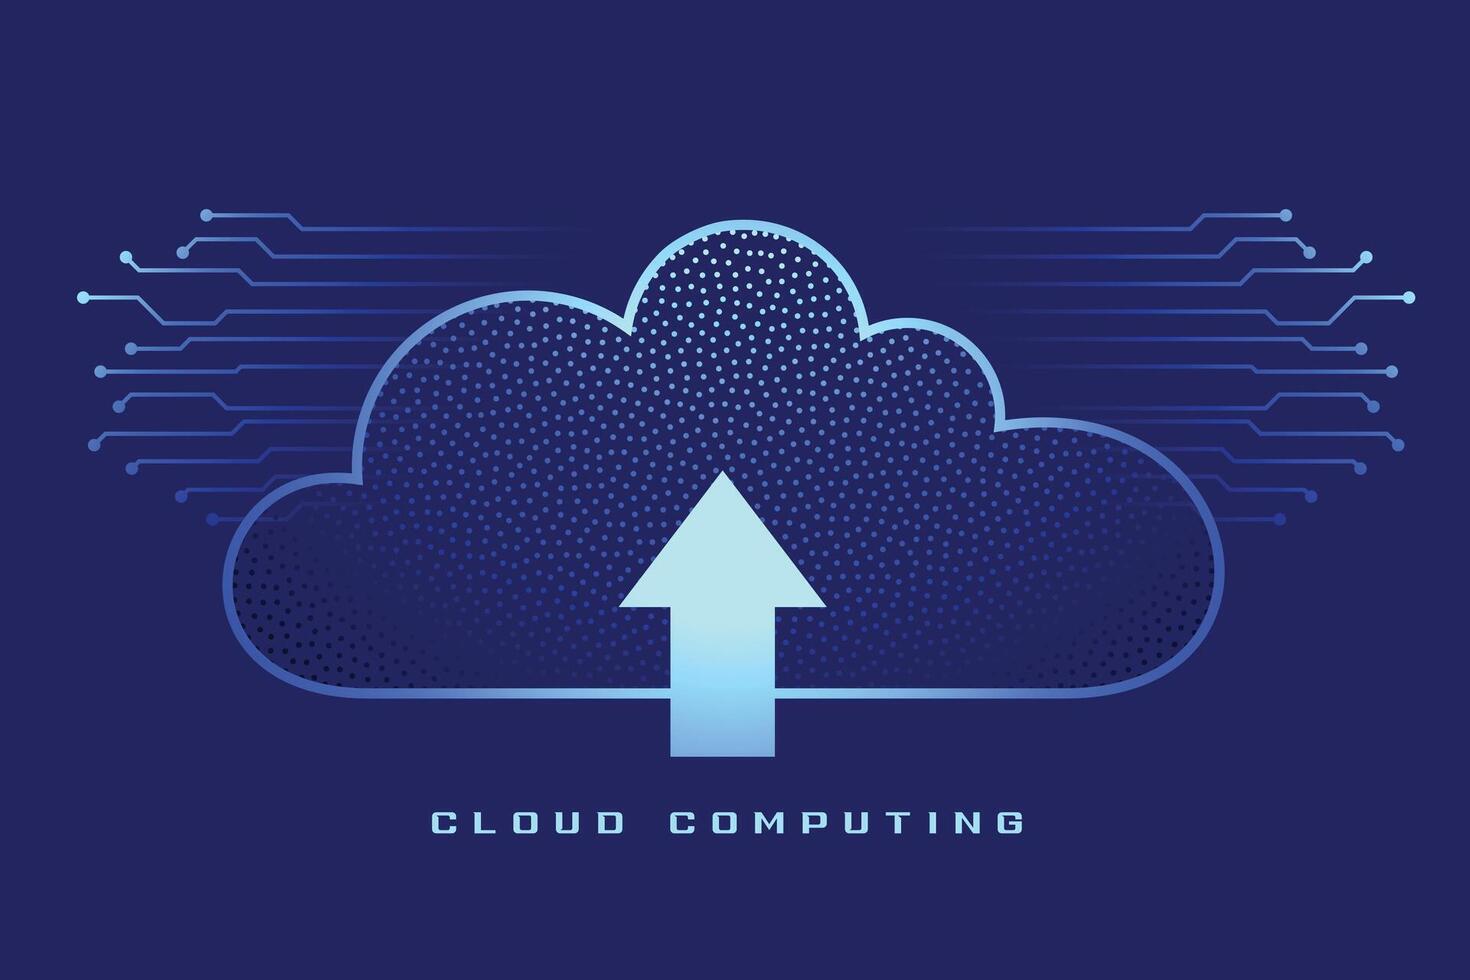 cloud computing background with upload arrow symbol vector